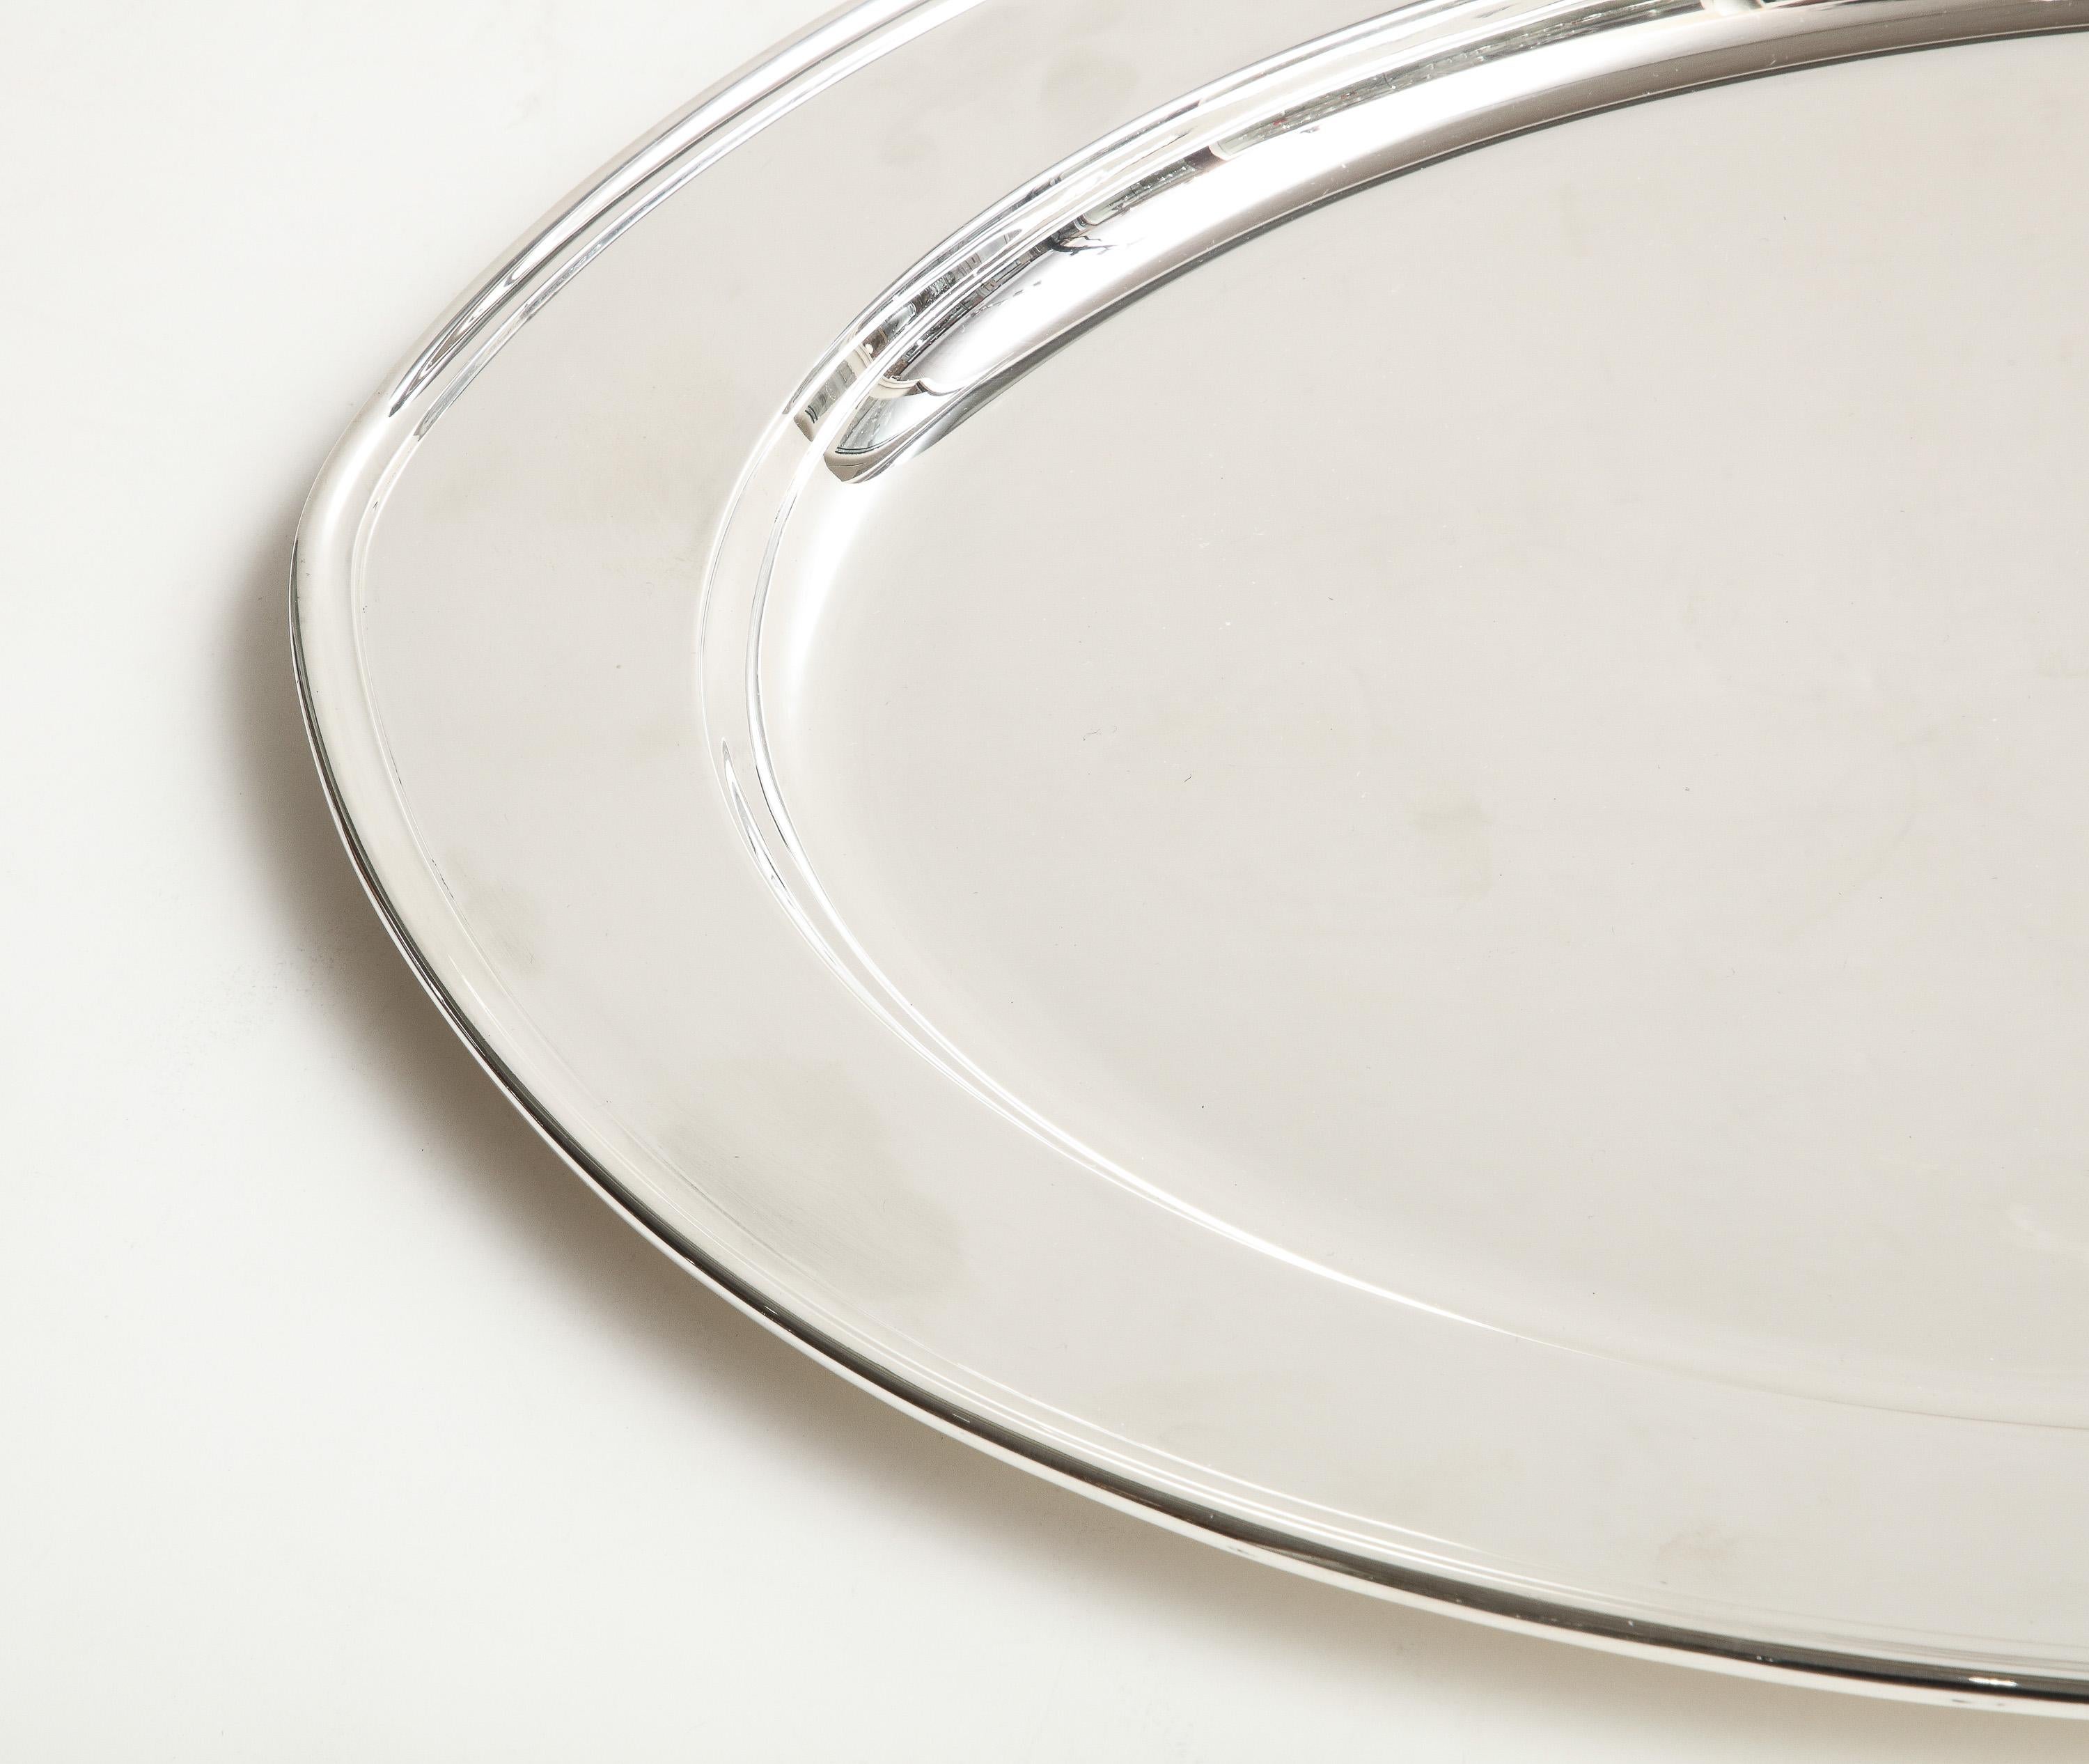 Large Art Deco Period Solid Sterling Silver Serving Platter By Gorham For Sale 4